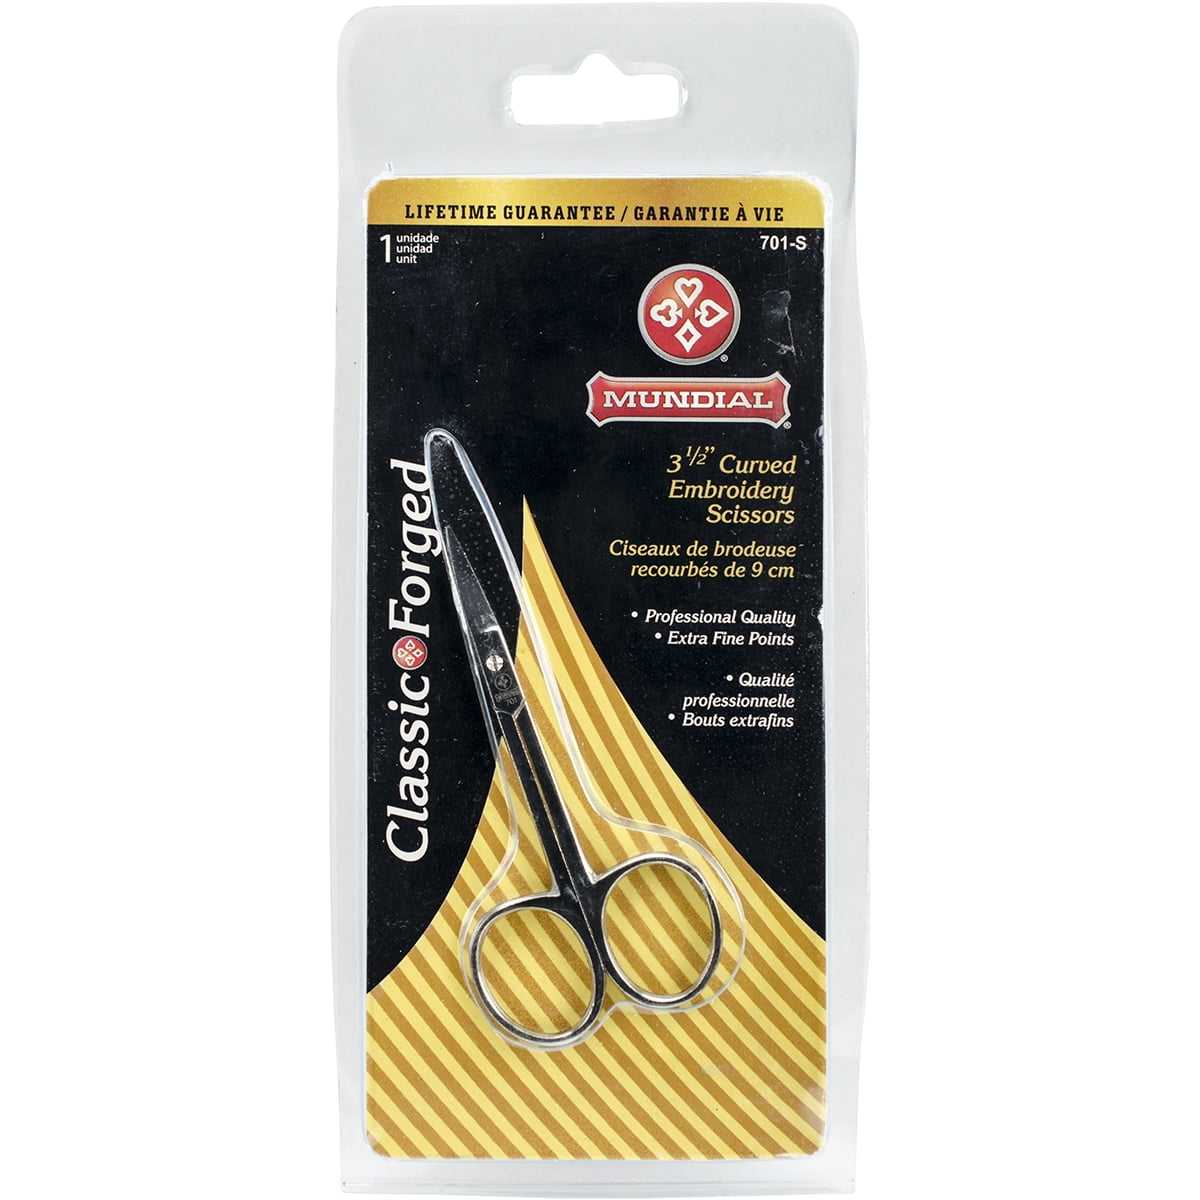 Mundial Classic Forged 3-1/2" Extra Fine Points Curved Embroidery Scissors 701-S 